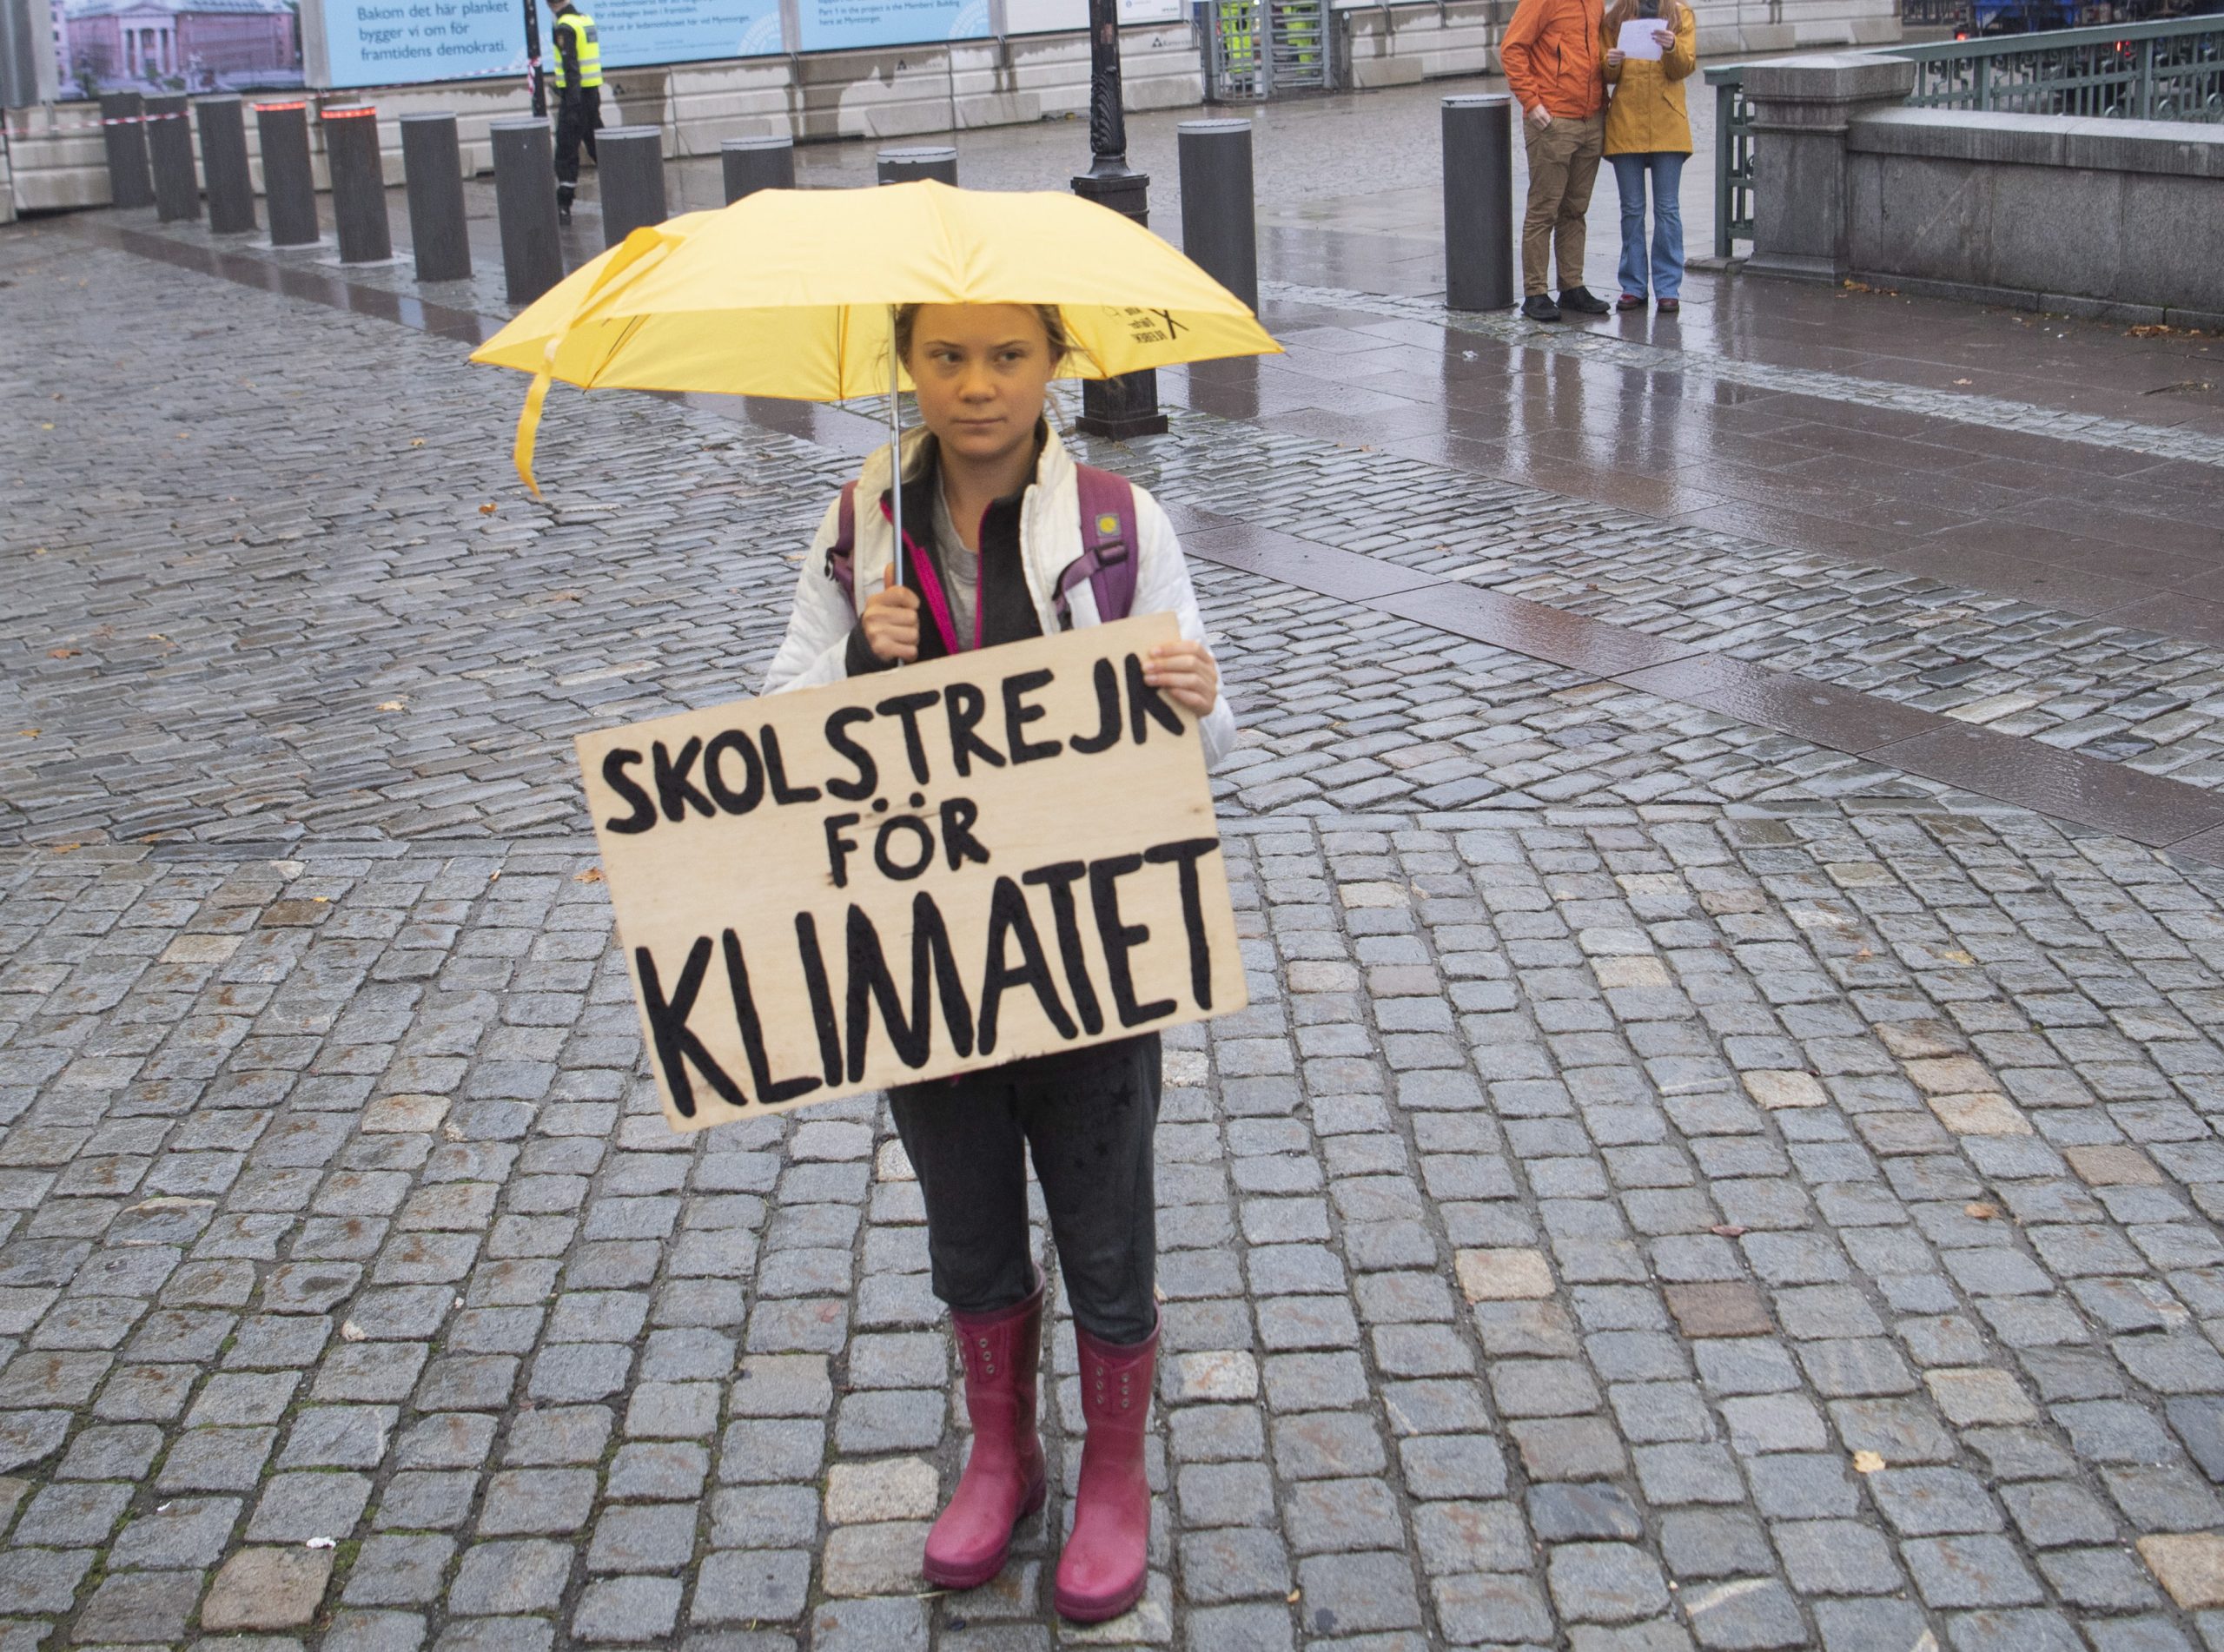 epa09524757 Swedish climate activist Greta Thunberg from the Fridays for Future climate movement protests at the Swedish Parliament Riksdagen in Stockholm, Seden, 10 October 2021. The poster reads 'School strike for Climate'.  EPA/Fredrik Sandberg  SWEDEN OUT